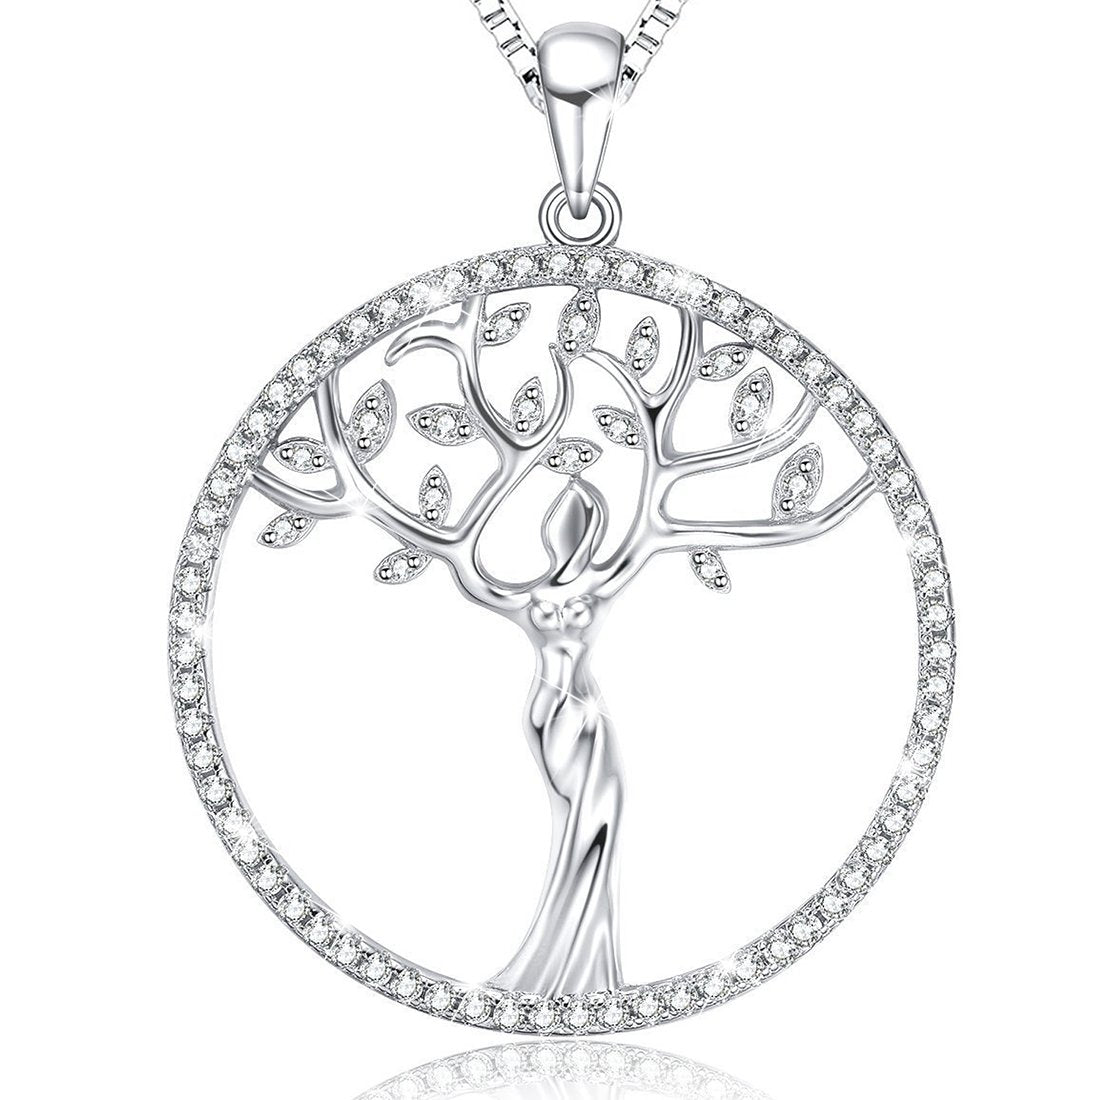 Aphrodite's Gifts for Sisters, To My Sister, Strong Roots - Tree of Life  Mini Heart Pendant Necklace Gift Set, Necklaces for Women, 925 Sterling  Silver, Birthda… | Tree of life symbol, Mini